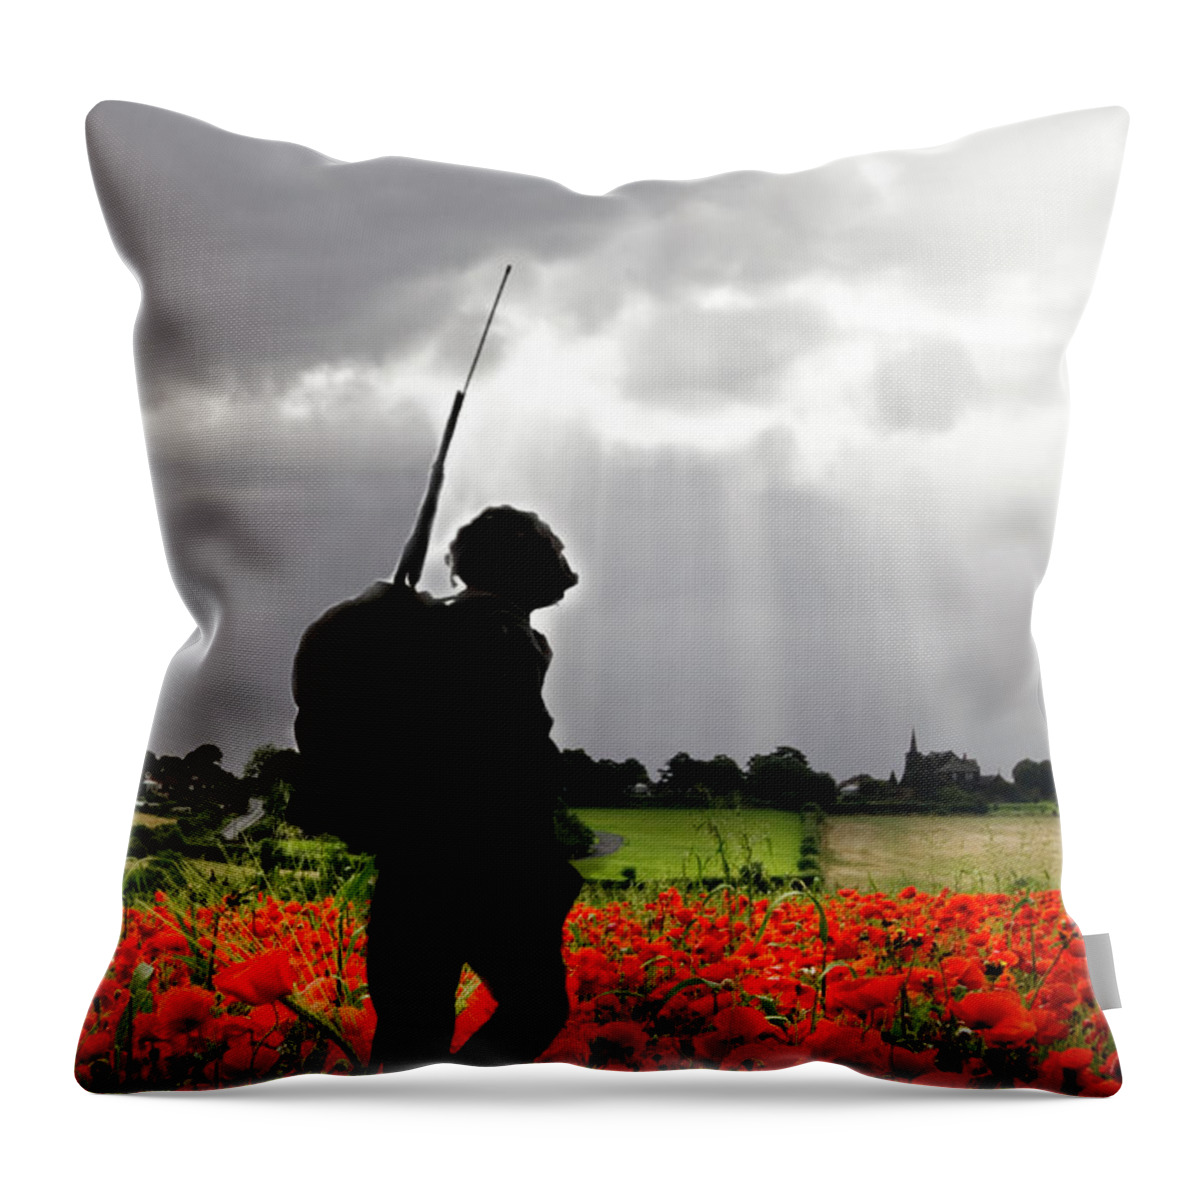 Soldier Throw Pillow featuring the digital art Lost Soldier by Airpower Art